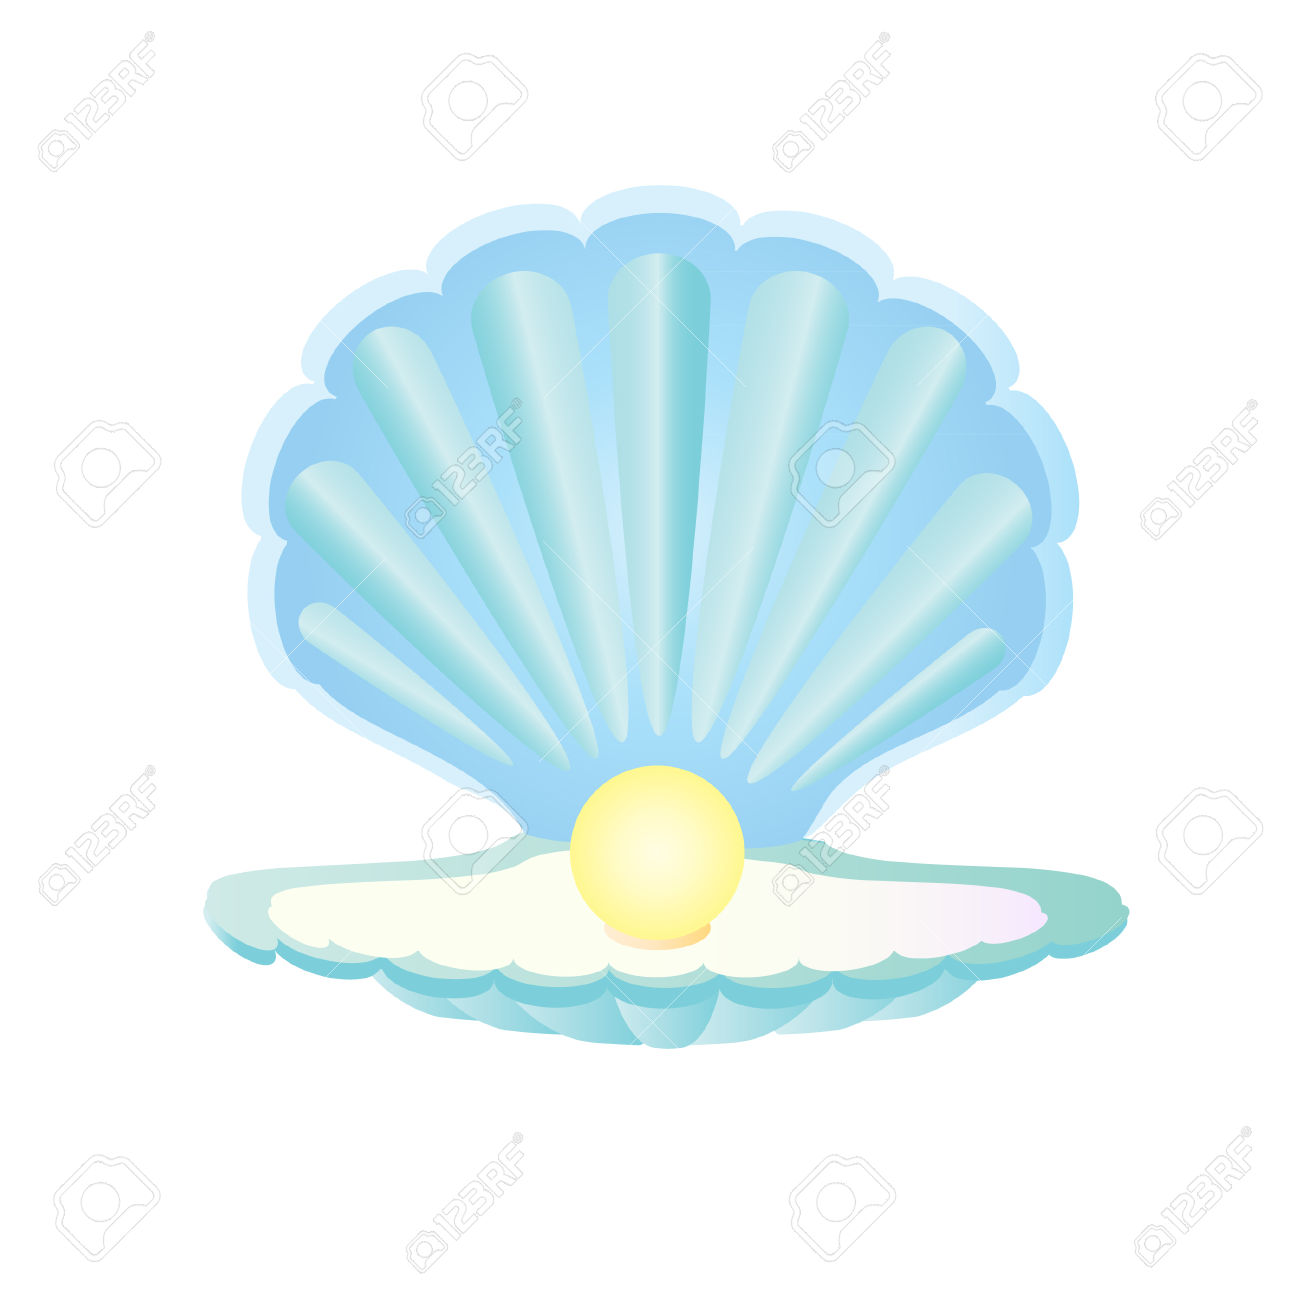 Collection of Seashell clipart | Free download best Seashell clipart on